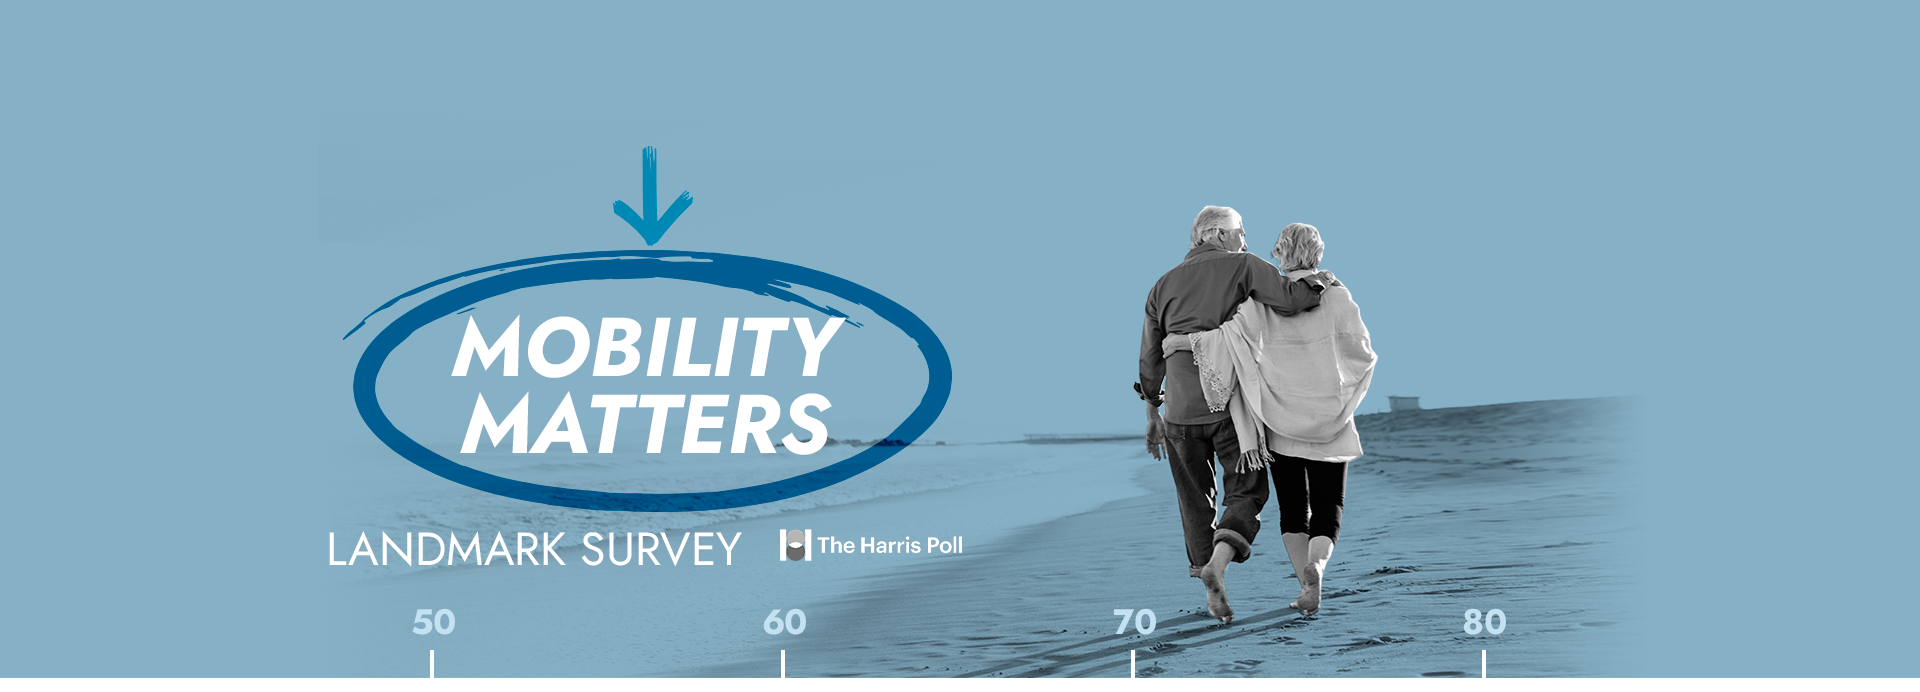 Image: Older couple walking on the beach. Text: Mobility Matters Landmark Survey The Harris Poll, Timeline 50, 60 70, and 80.